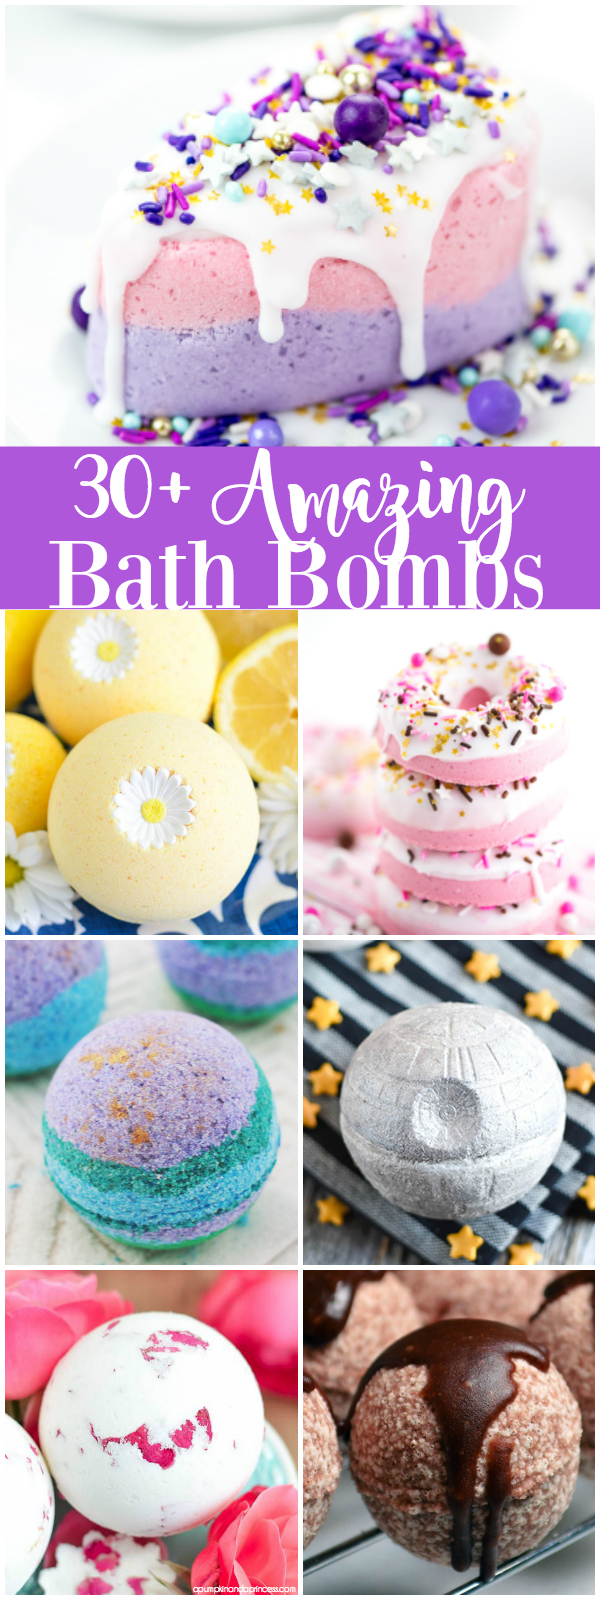 30+ Creative Bath Bombs - These amazing bath bomb recipes and tutorials make a great handmade gift for birthdays, holidays and Mother's Day.